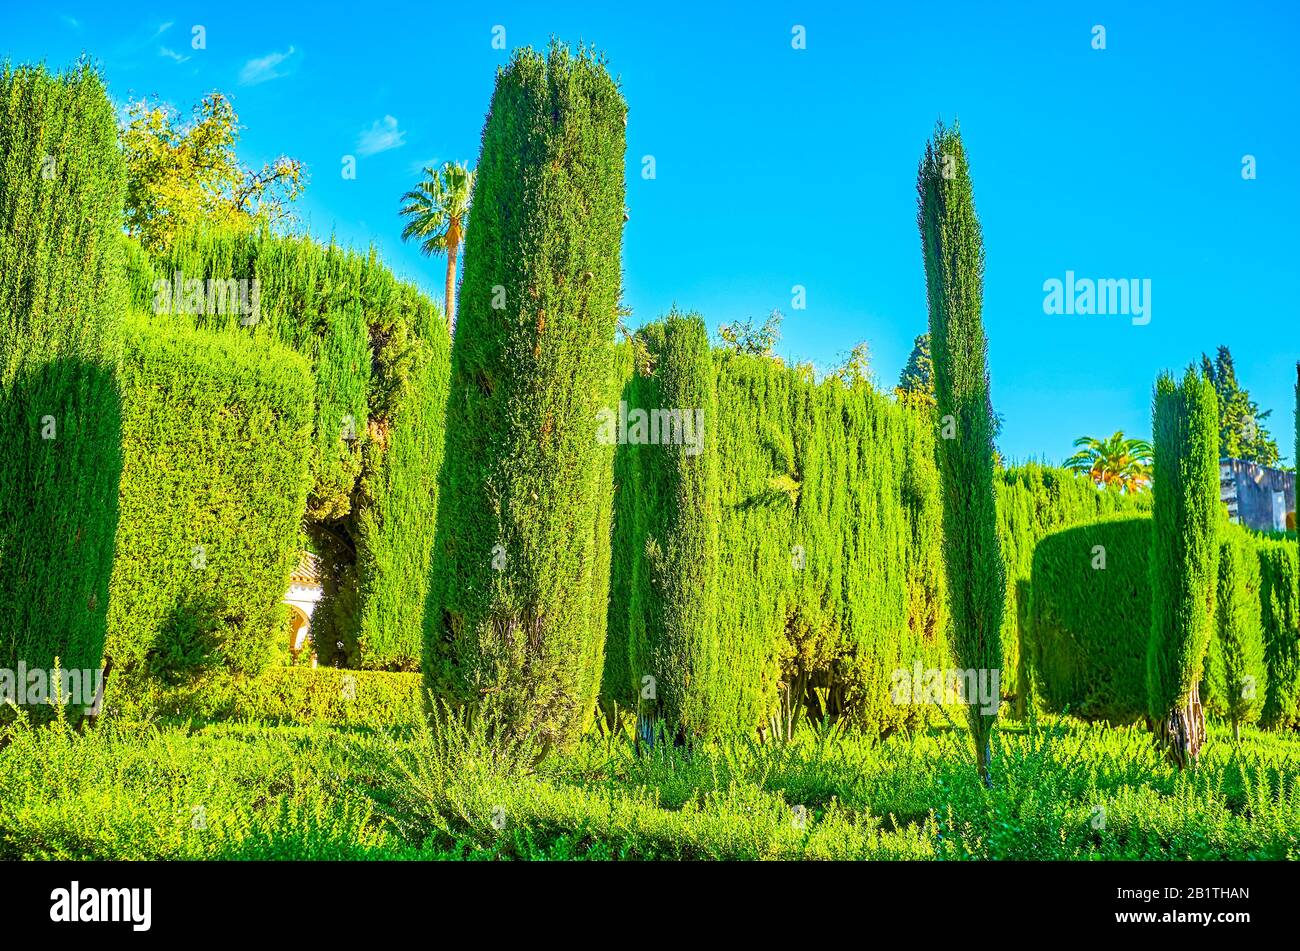 SEVILLE, SPAIN - OCTOBER 1, 2019: The geometrically trimmed plants are one of the famous features of labyrinth in Alcazar Gardens, on October 1 in Sev Stock Photo